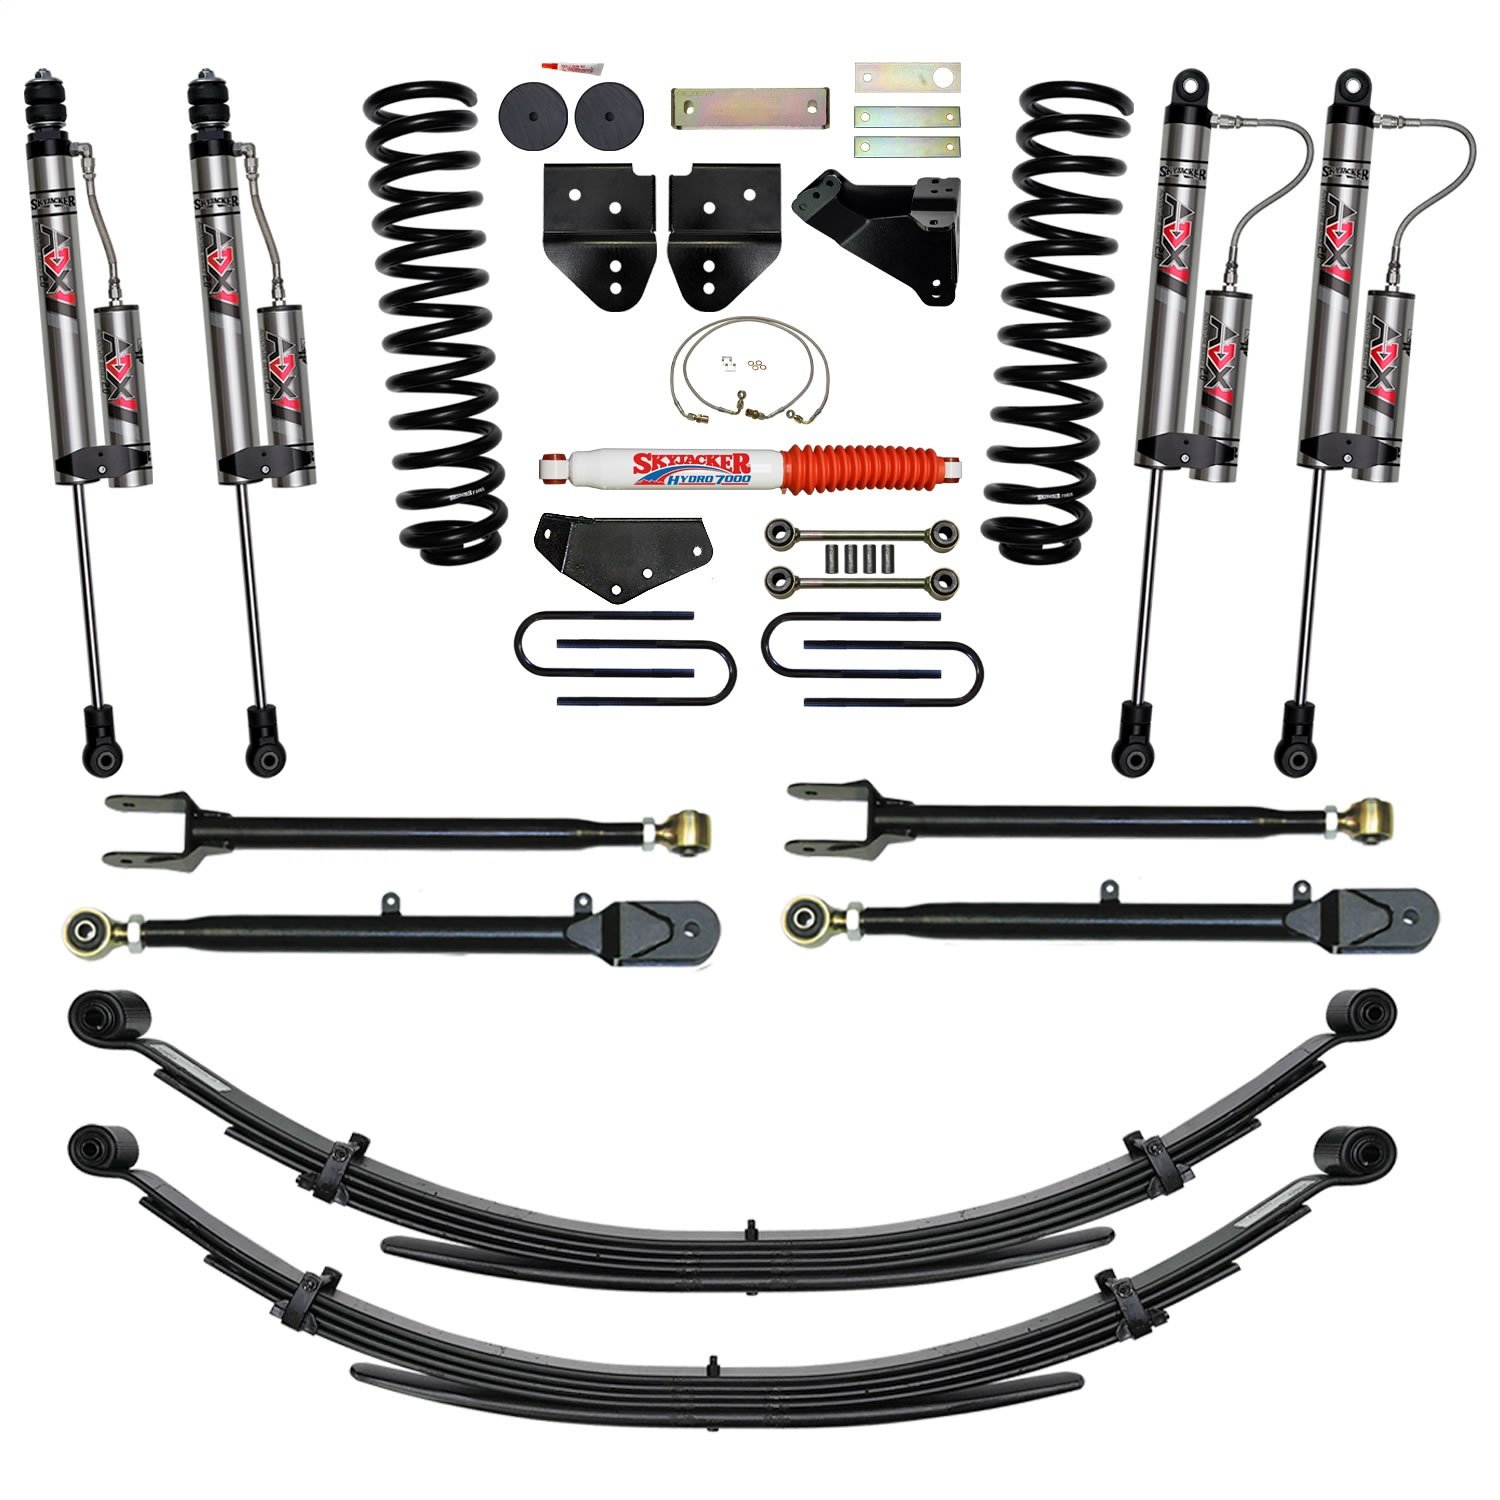 08-10 Ford SD ADX 6" Lift